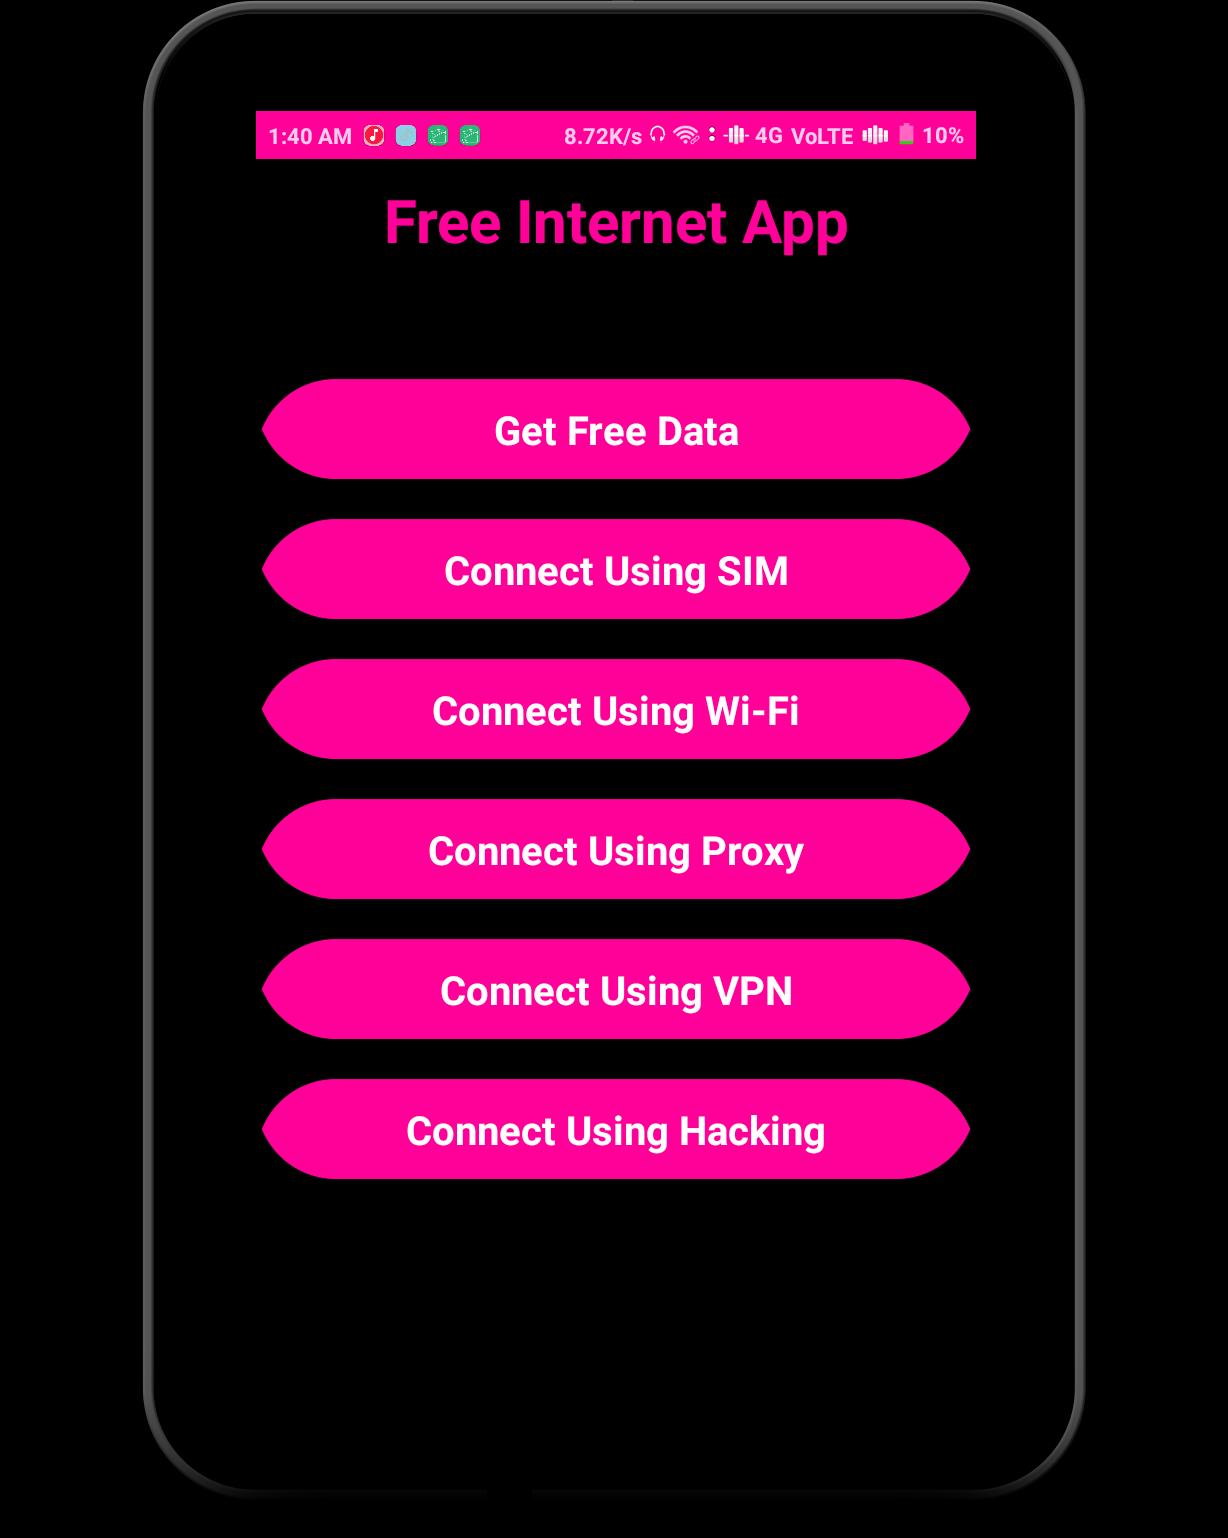 free internet app for Android - APK Download - 